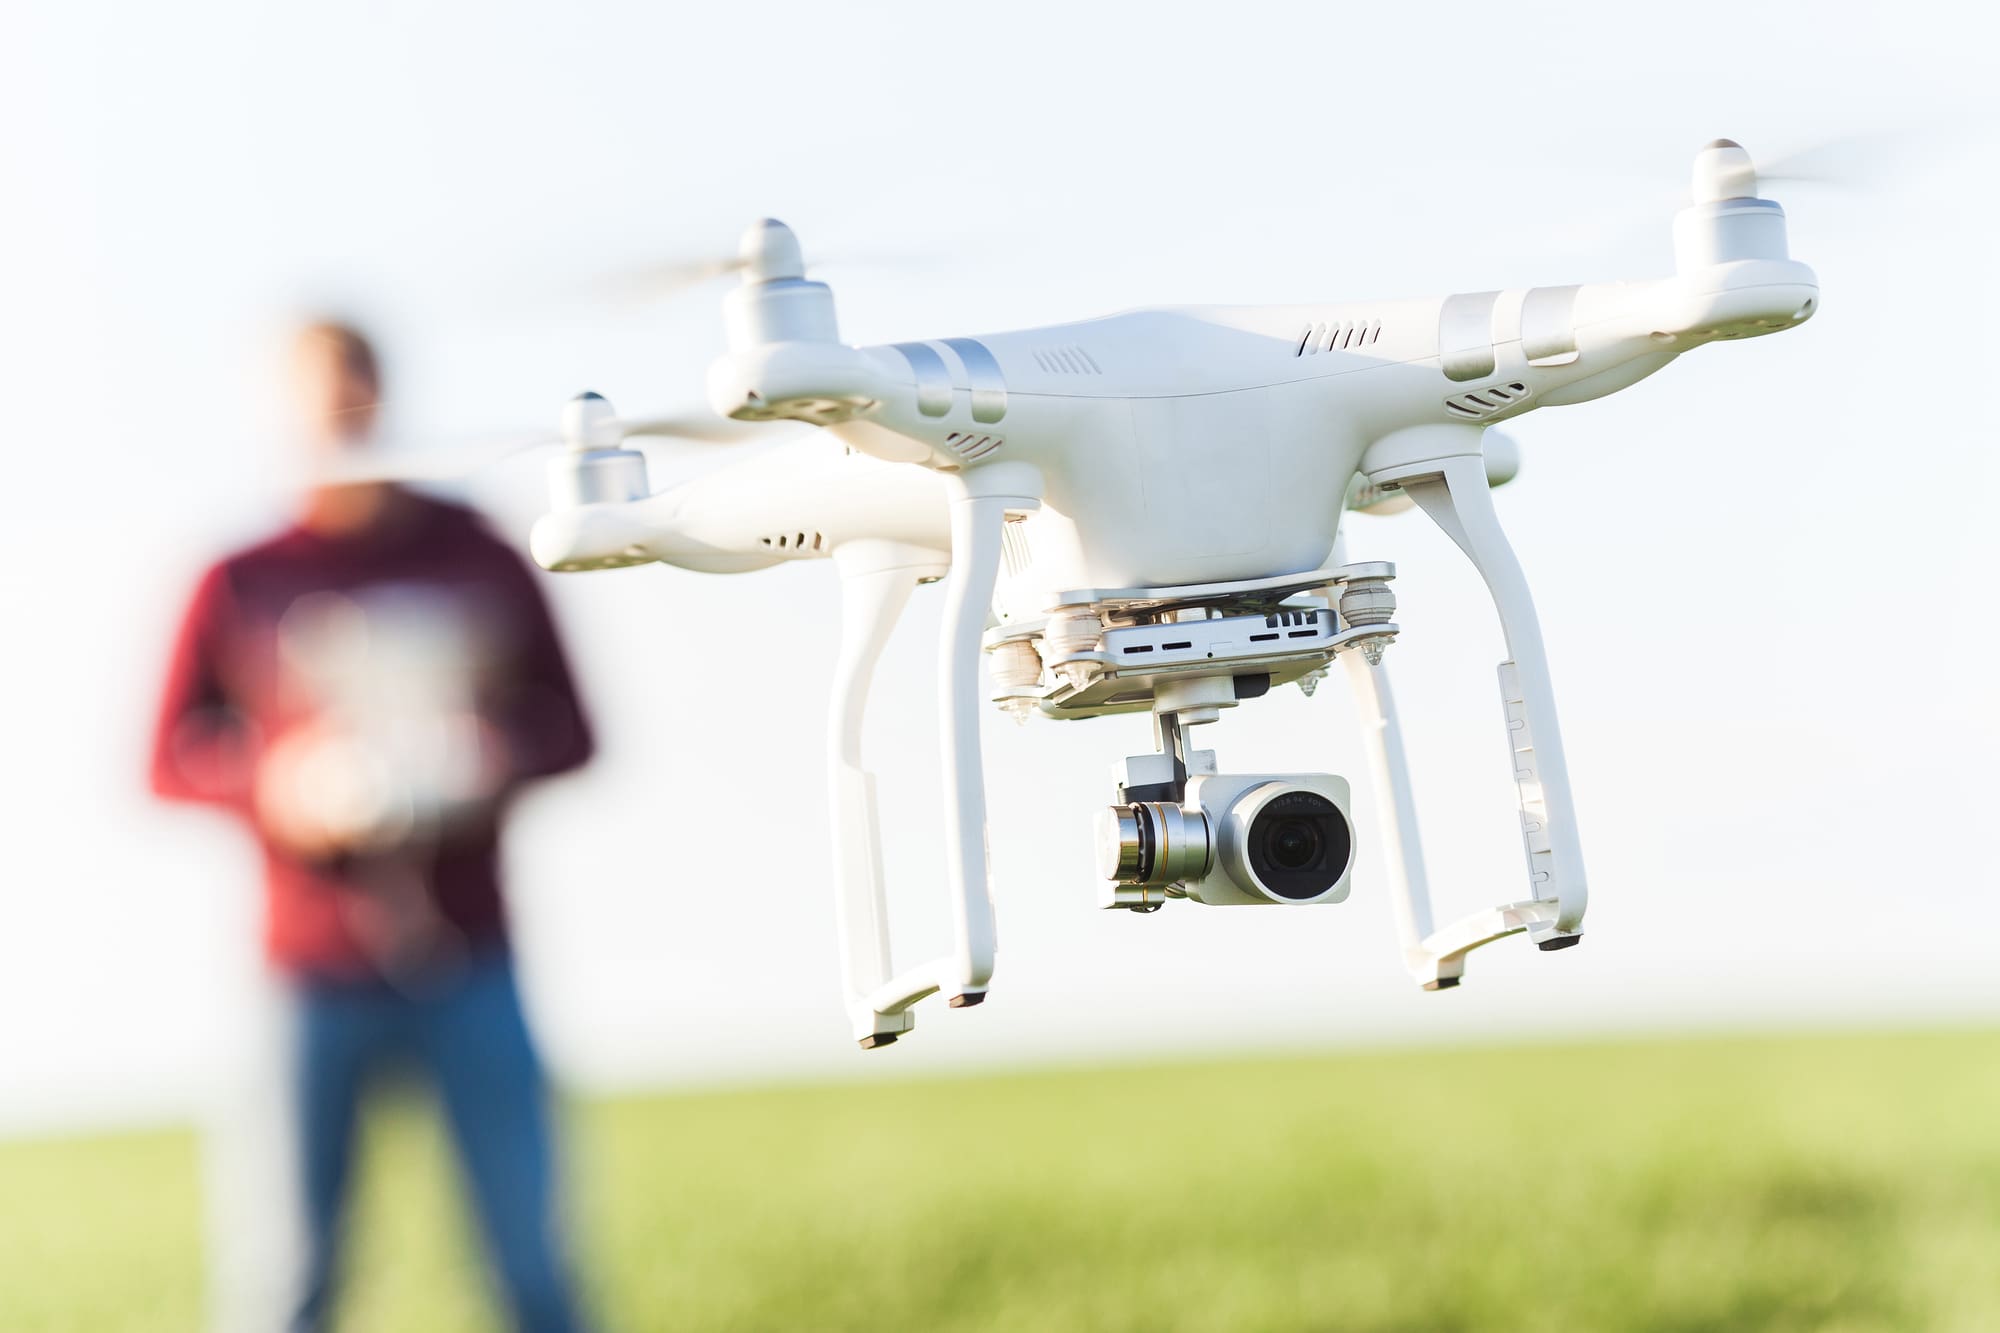 How to get Commercial Drone License in Dubai